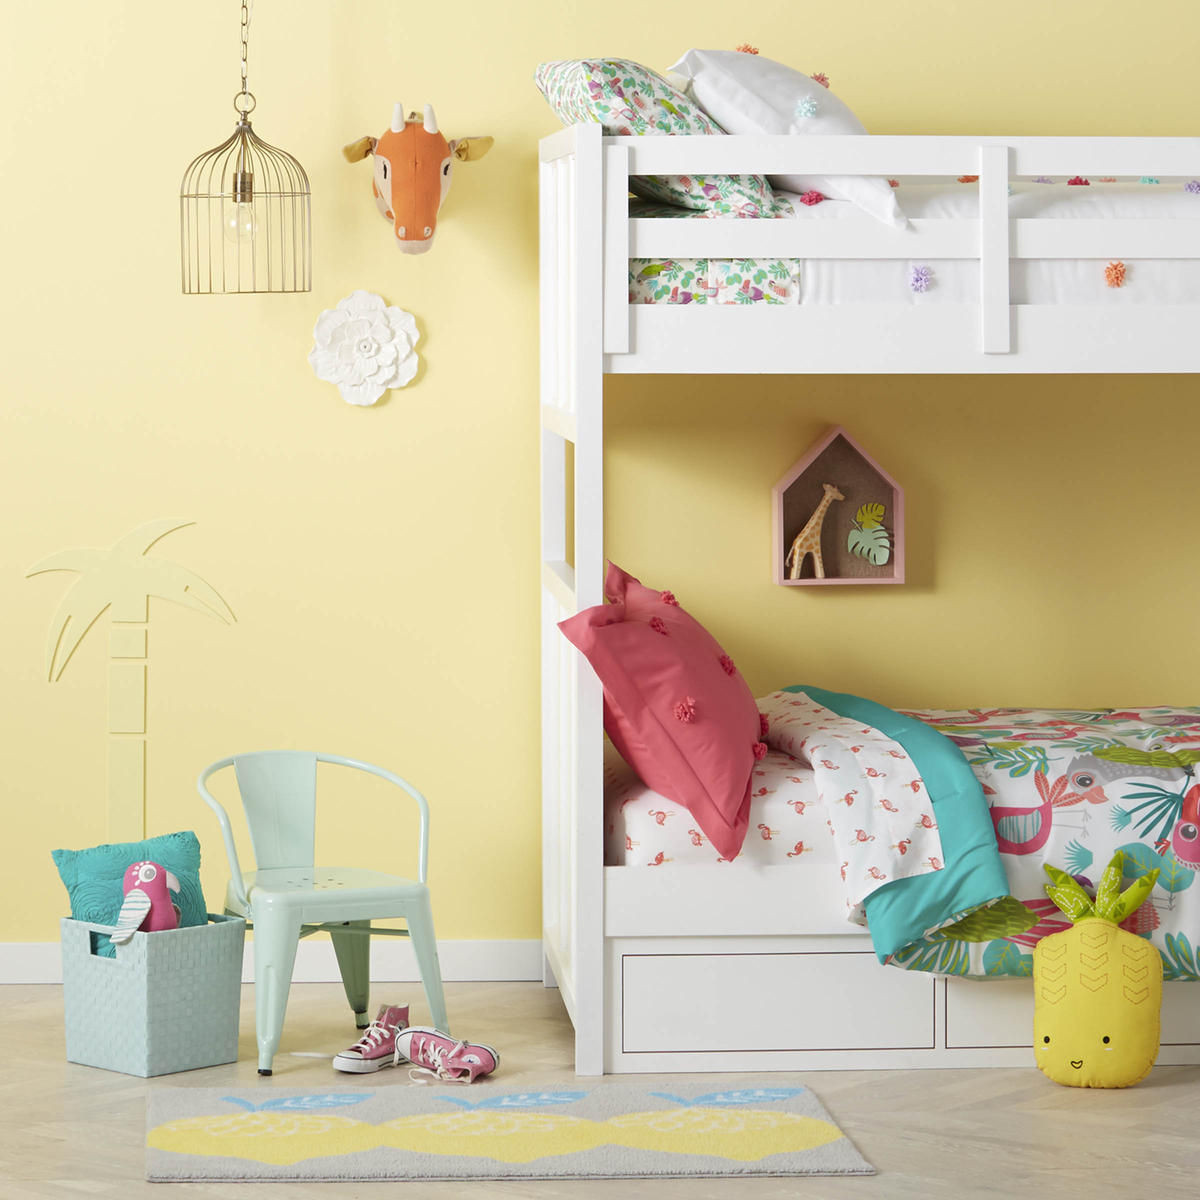 Target Kids Decor
 Cozy Up to Tar s New Pillowfort Kids Decor Collection